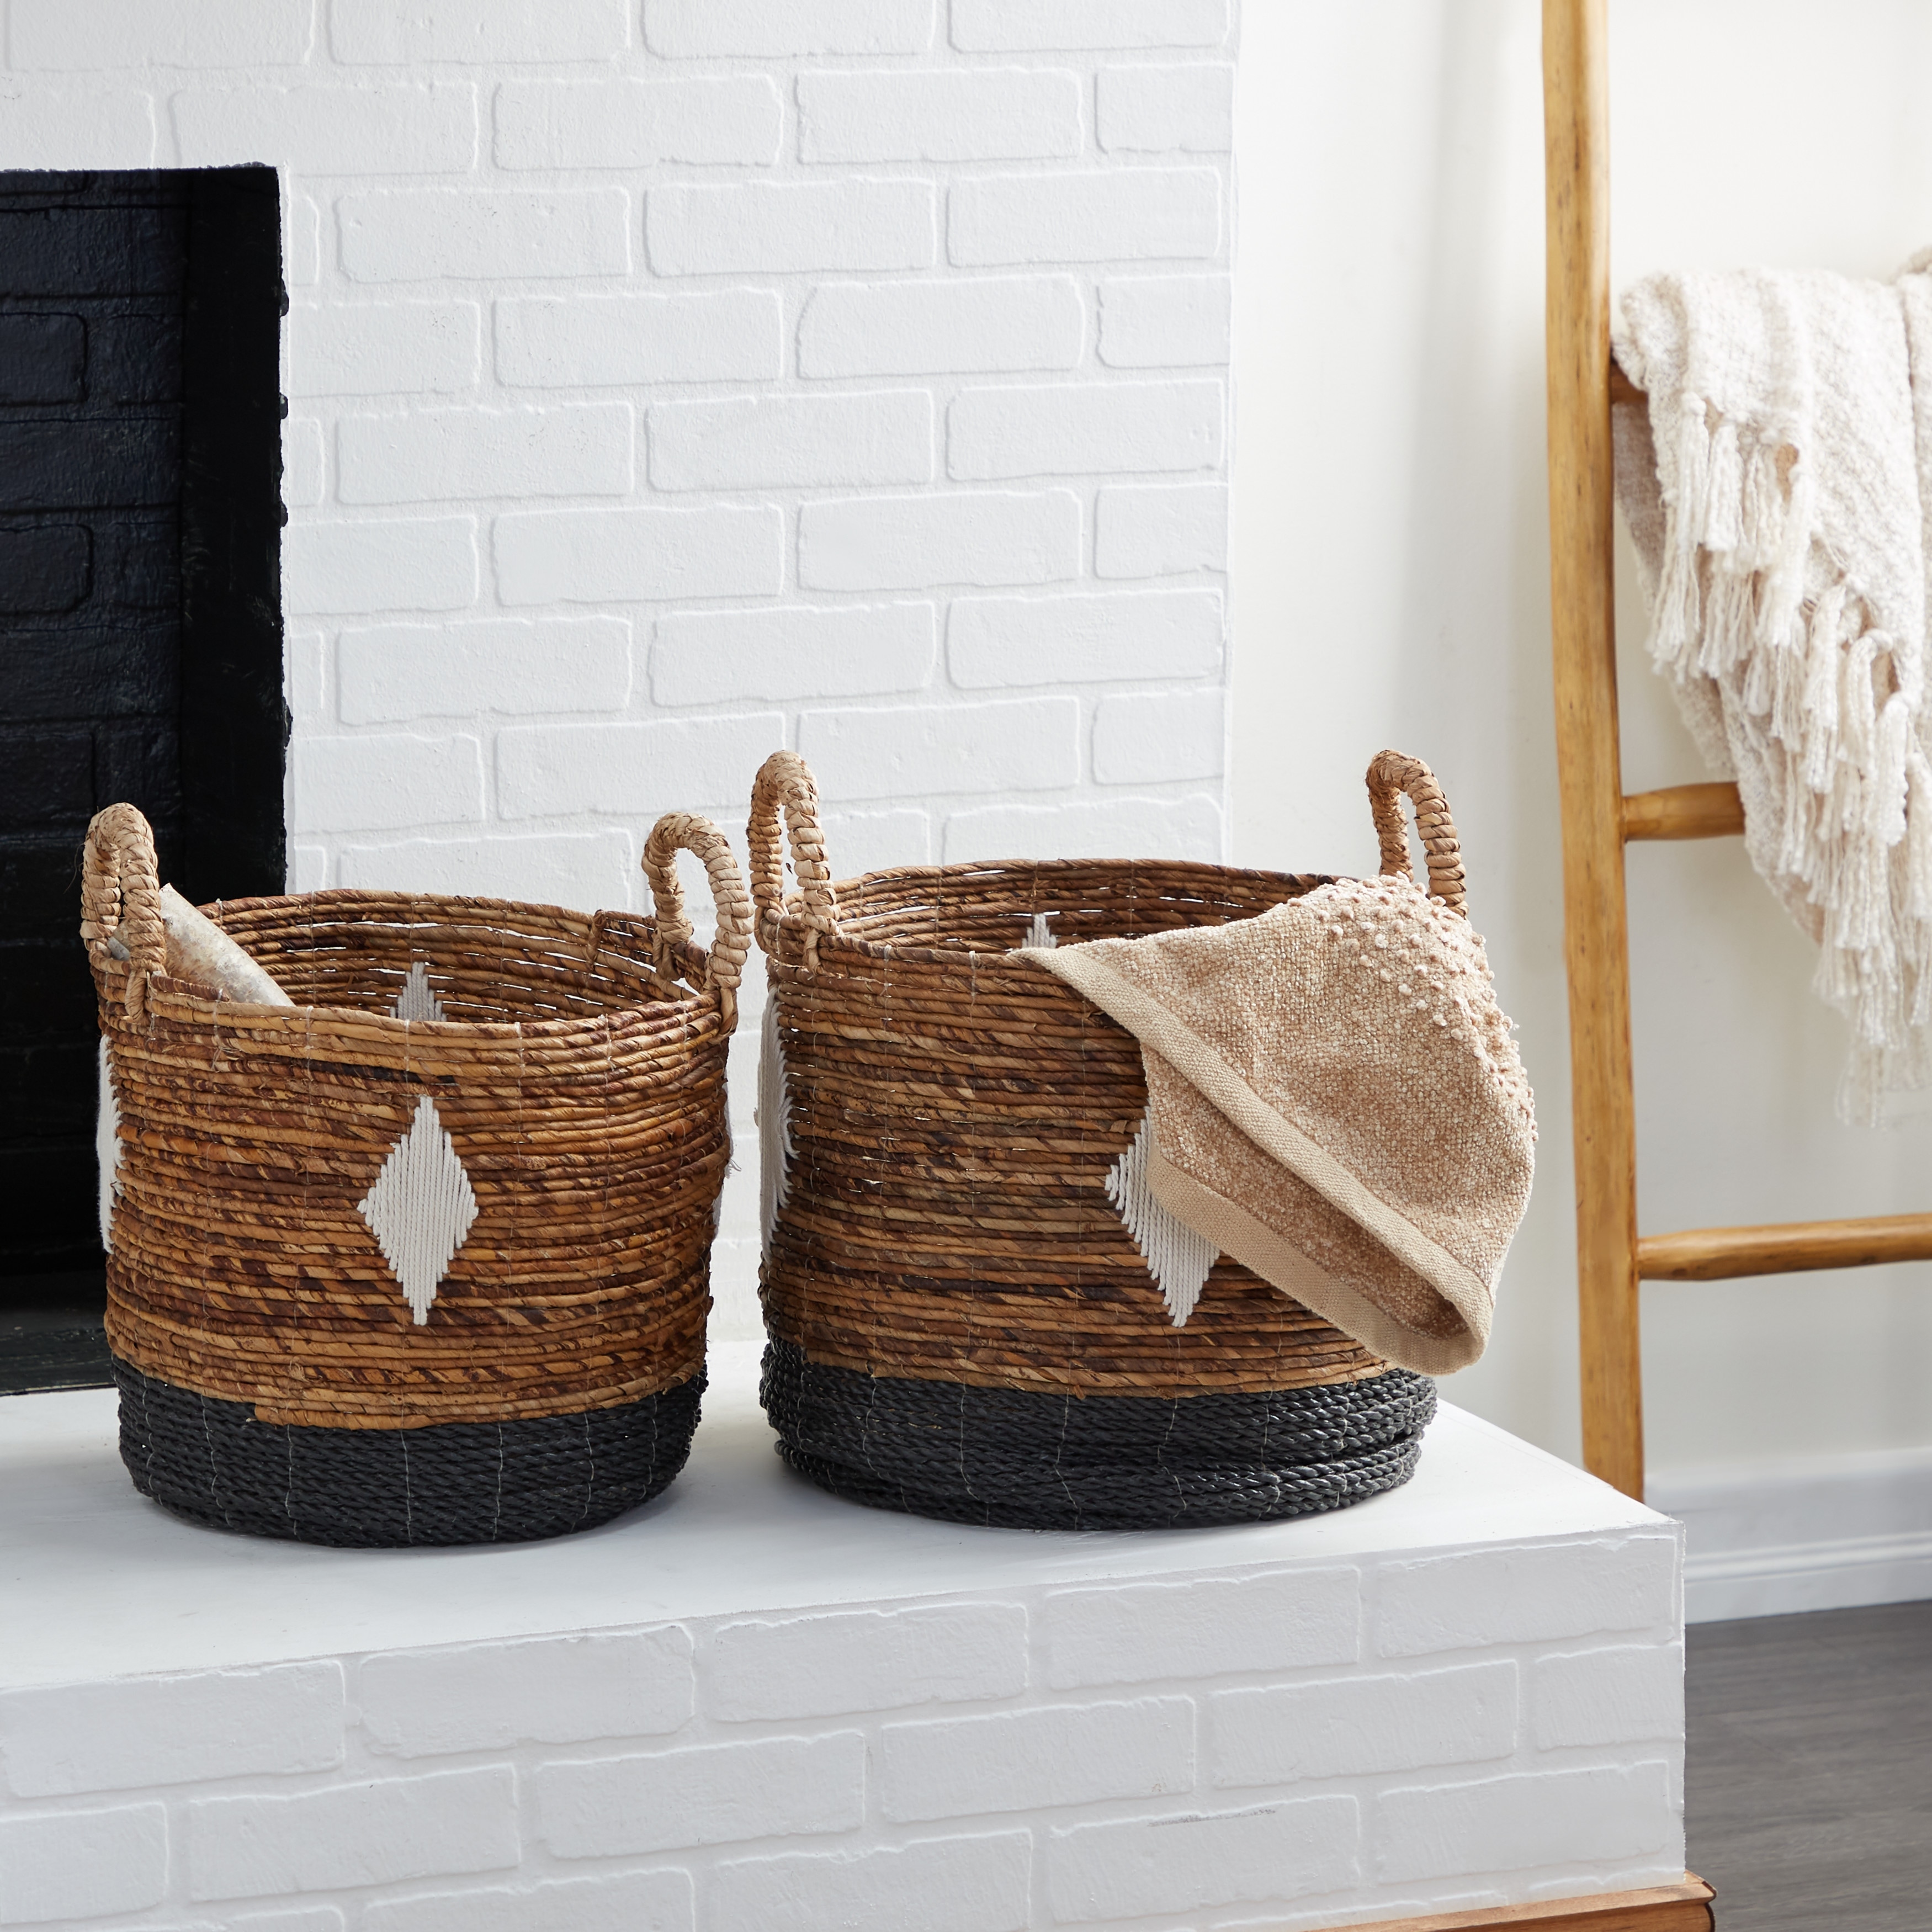 https://ak1.ostkcdn.com/images/products/is/images/direct/a9325fe812a555a9549e86aa32fbbc54ddb63cff/Brown-Banana-Leaf-Natural-Storage-Basket-%28Set-of-2%29.jpg